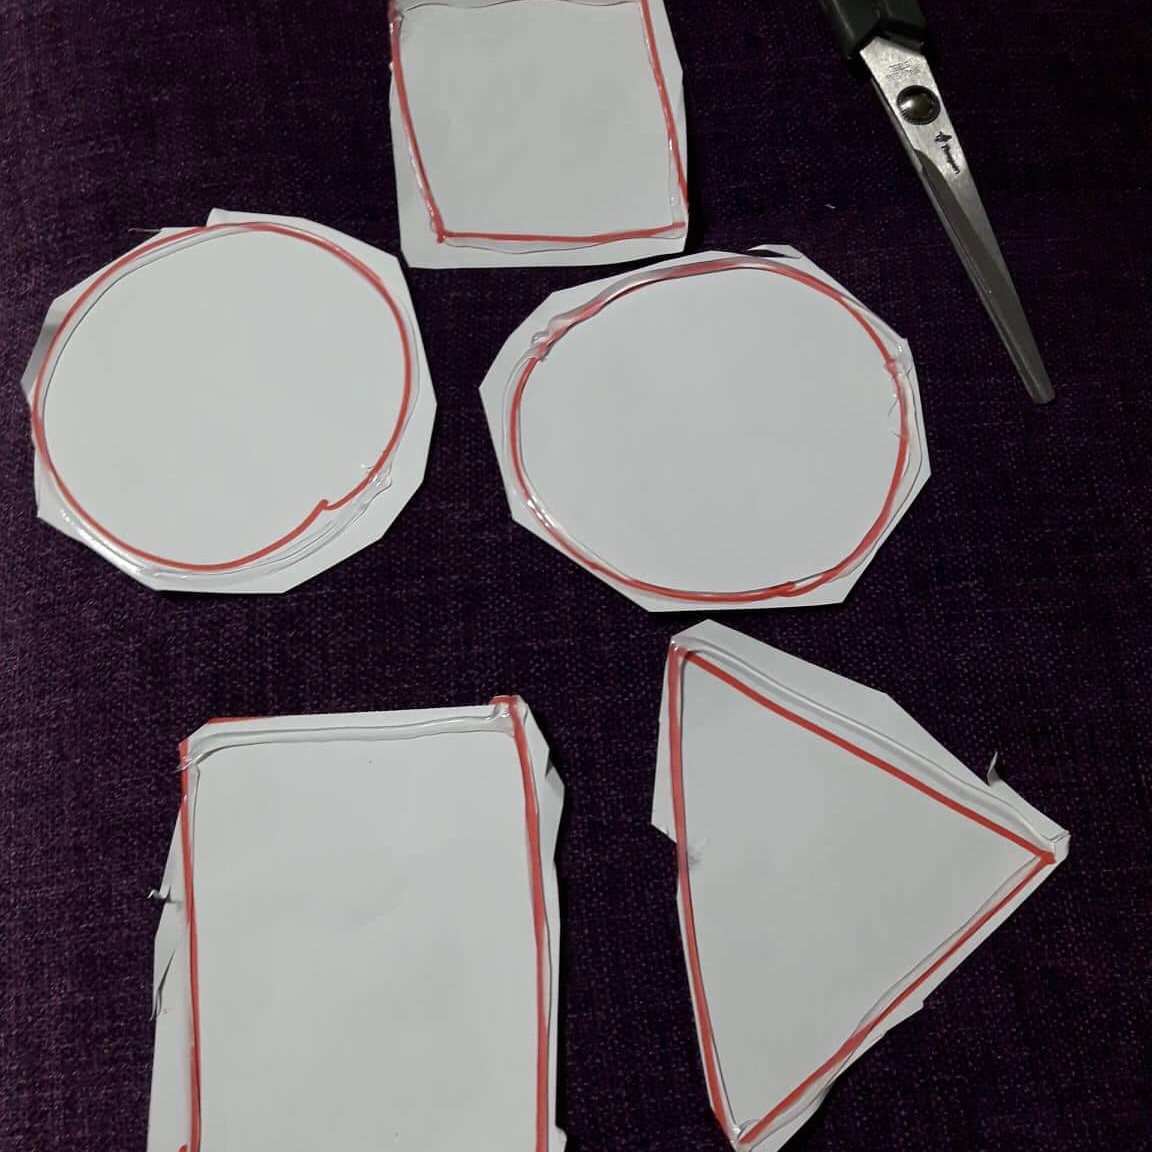 Shapes outlined with glue and cut out